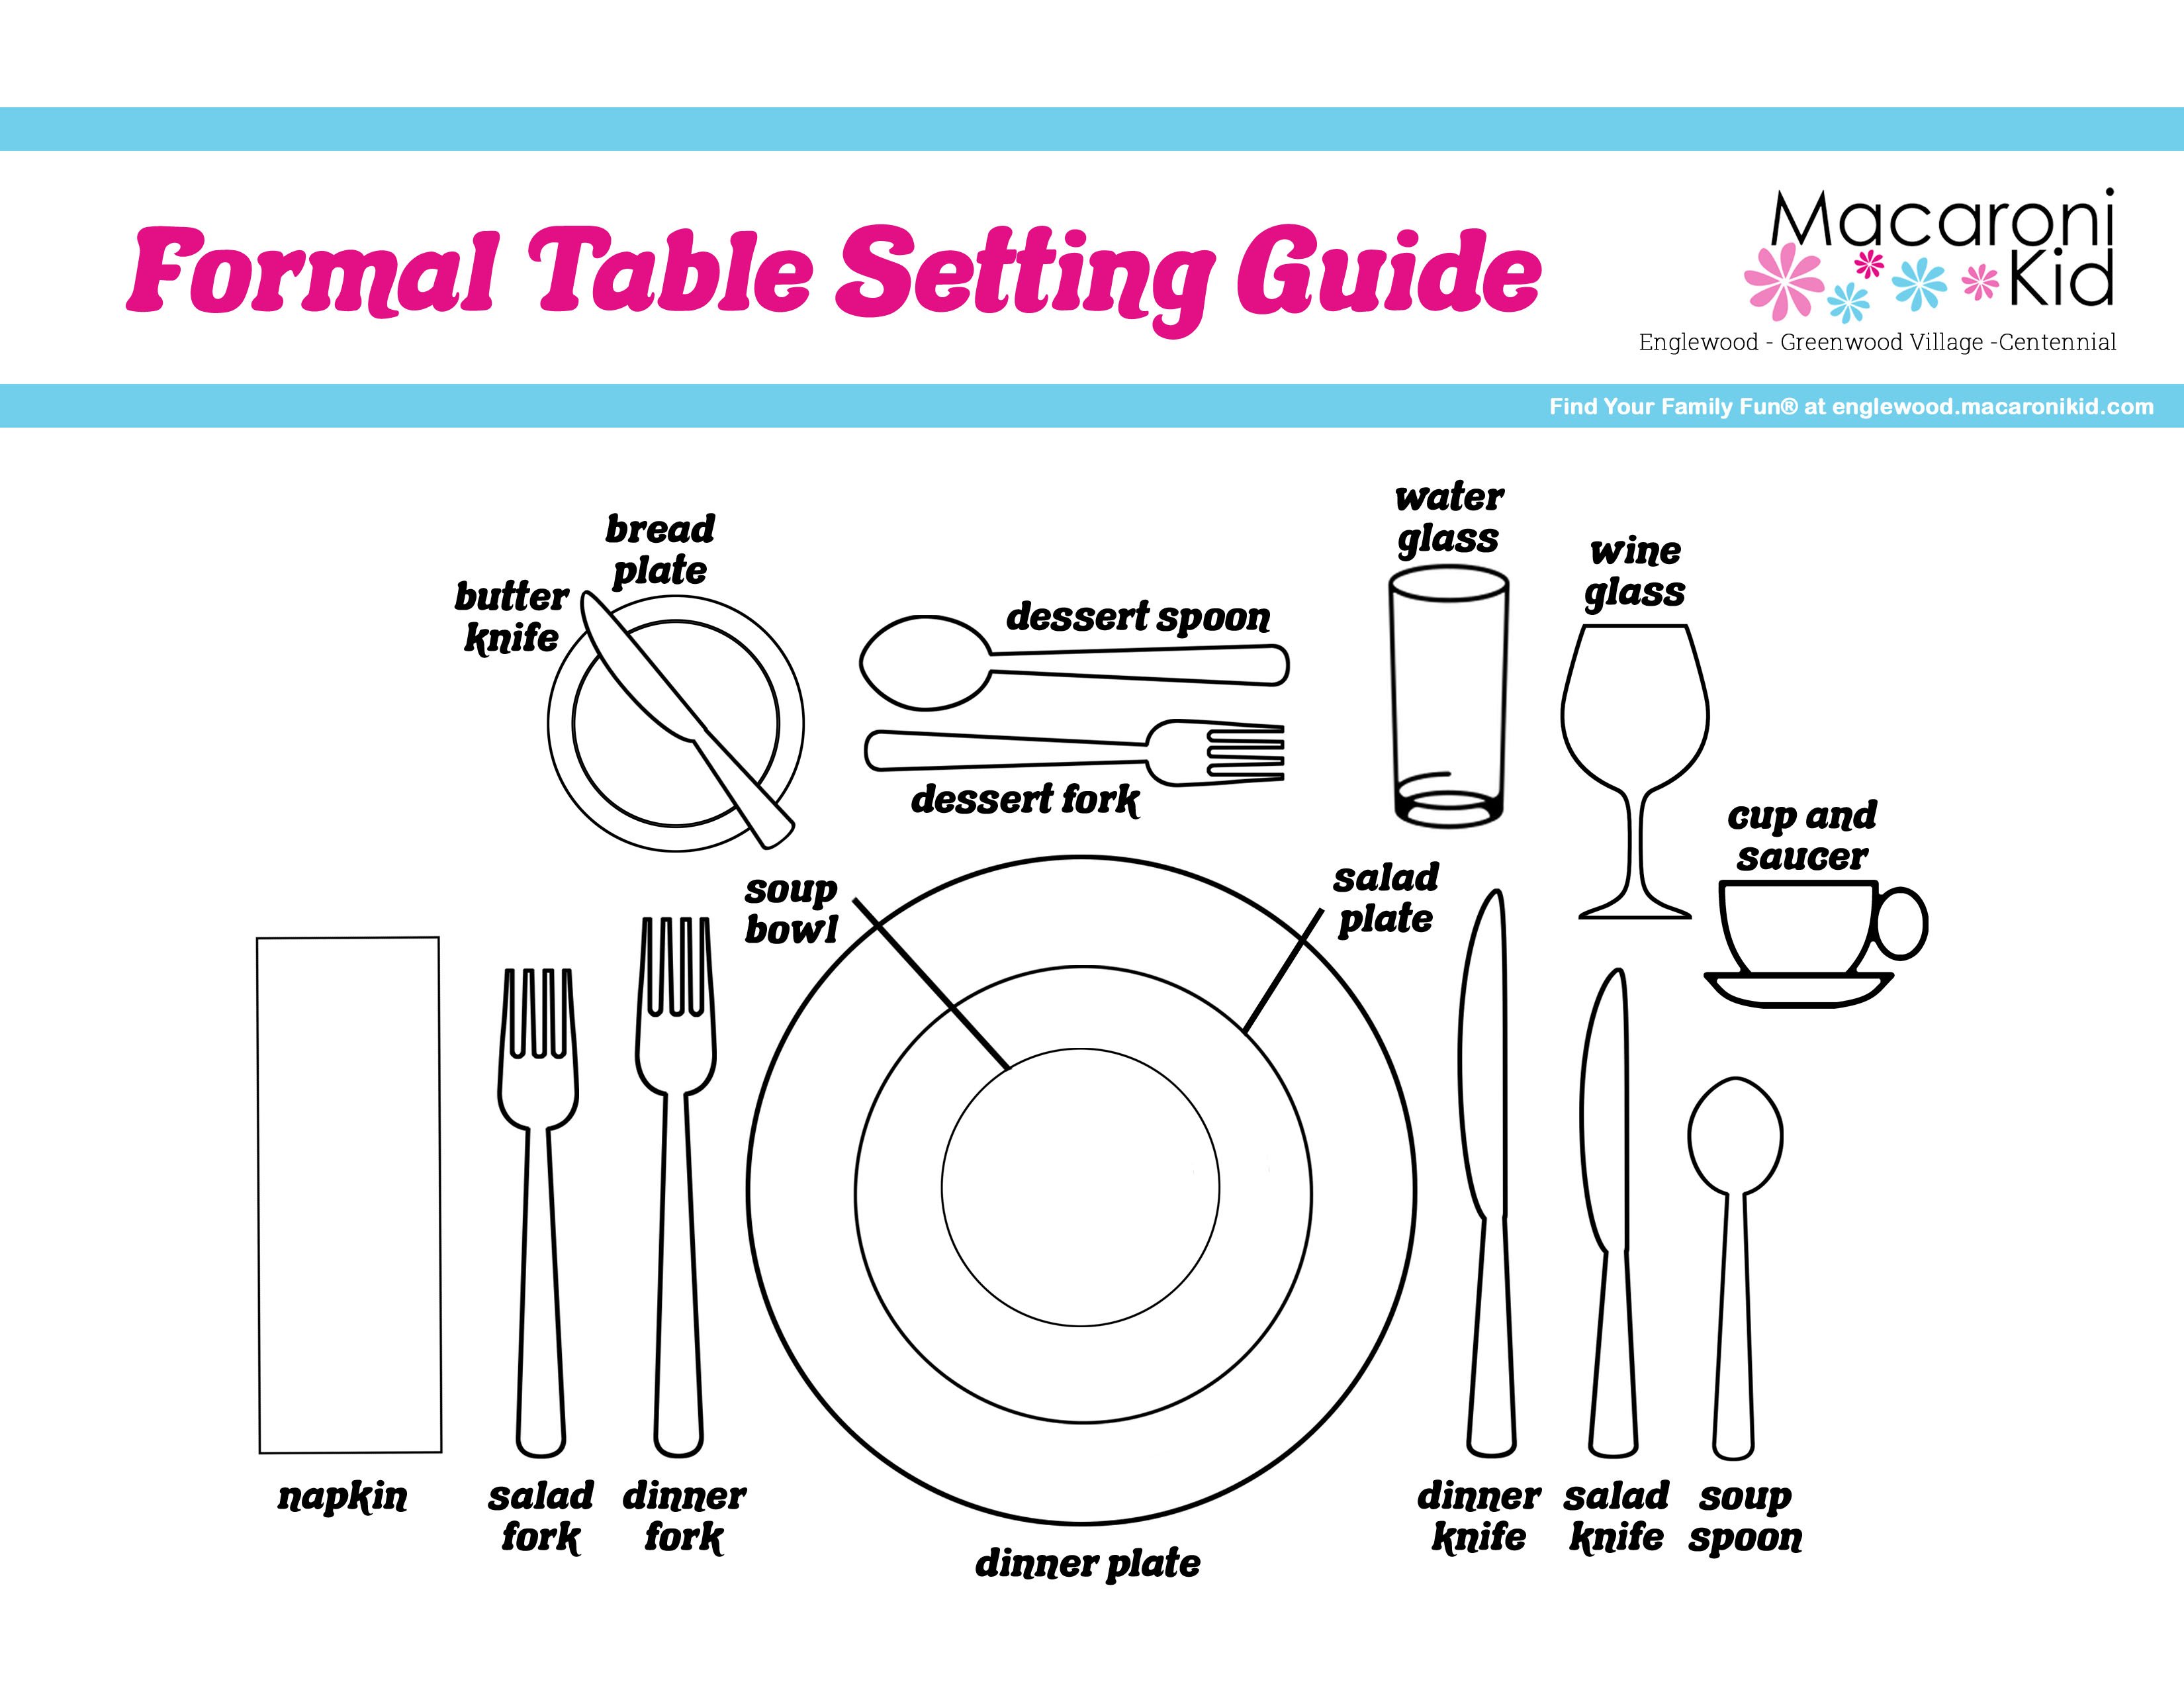 Host a Formal Dinner to Teach Table Setting & Mealtime Etiquette ...